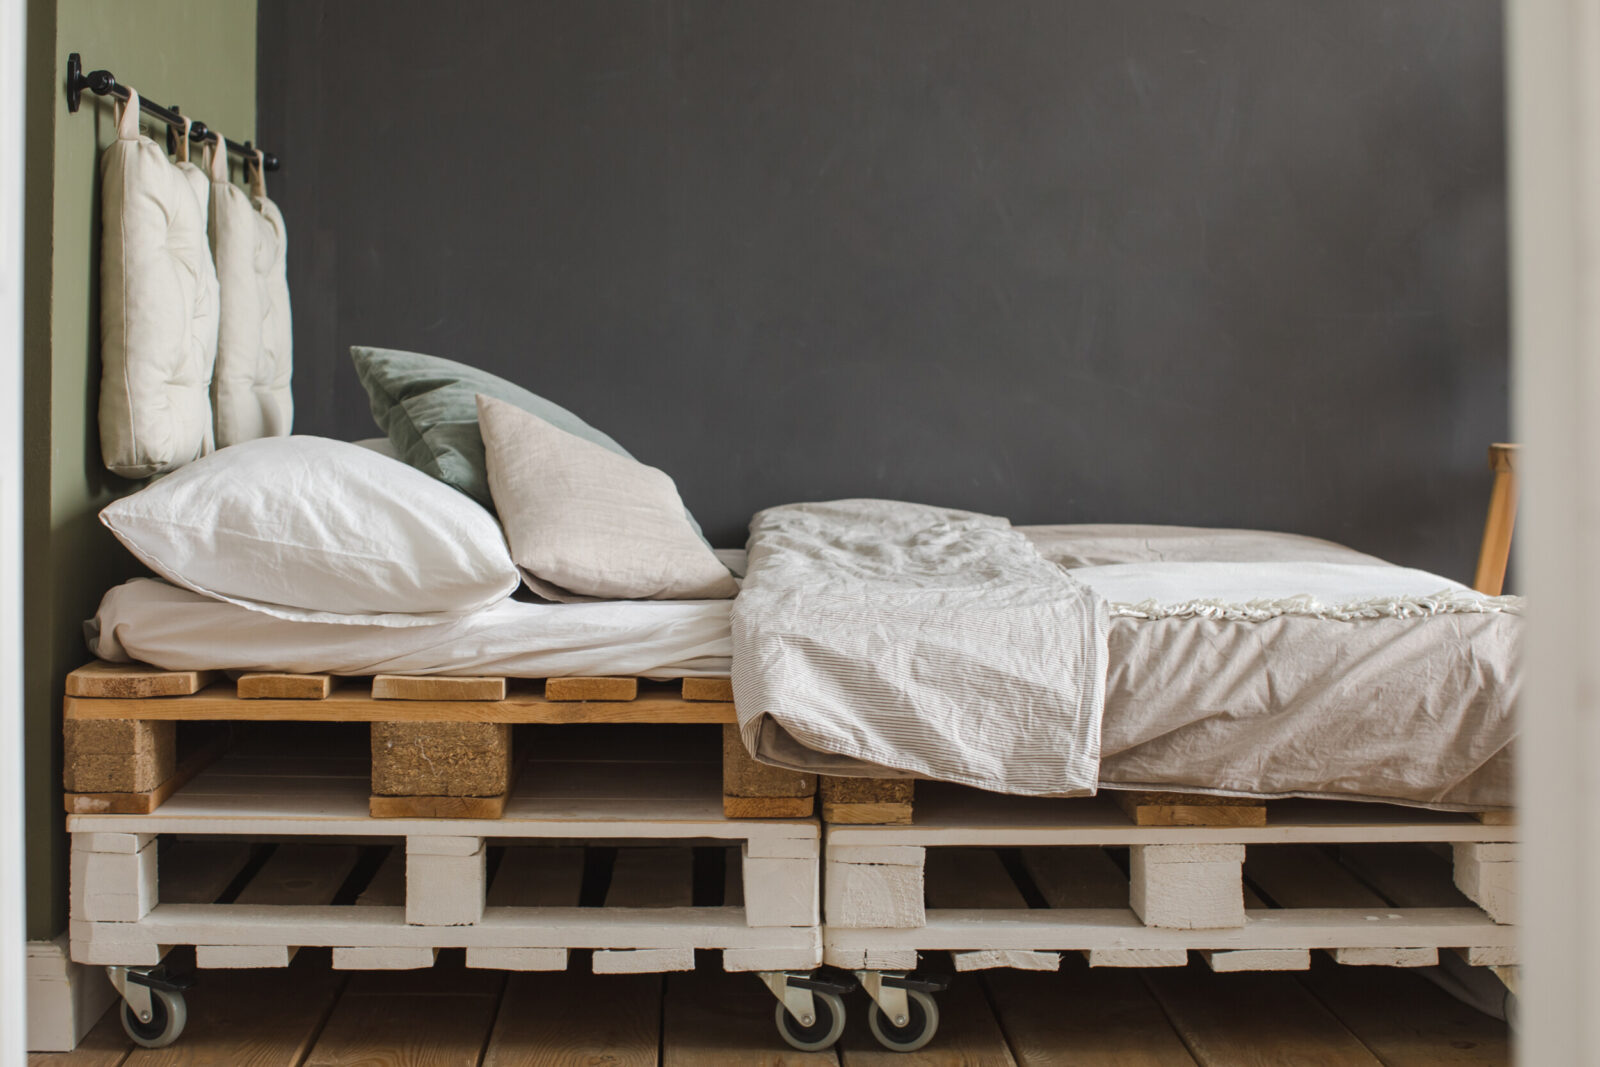 industrial style bedroom with recycled pallet bed